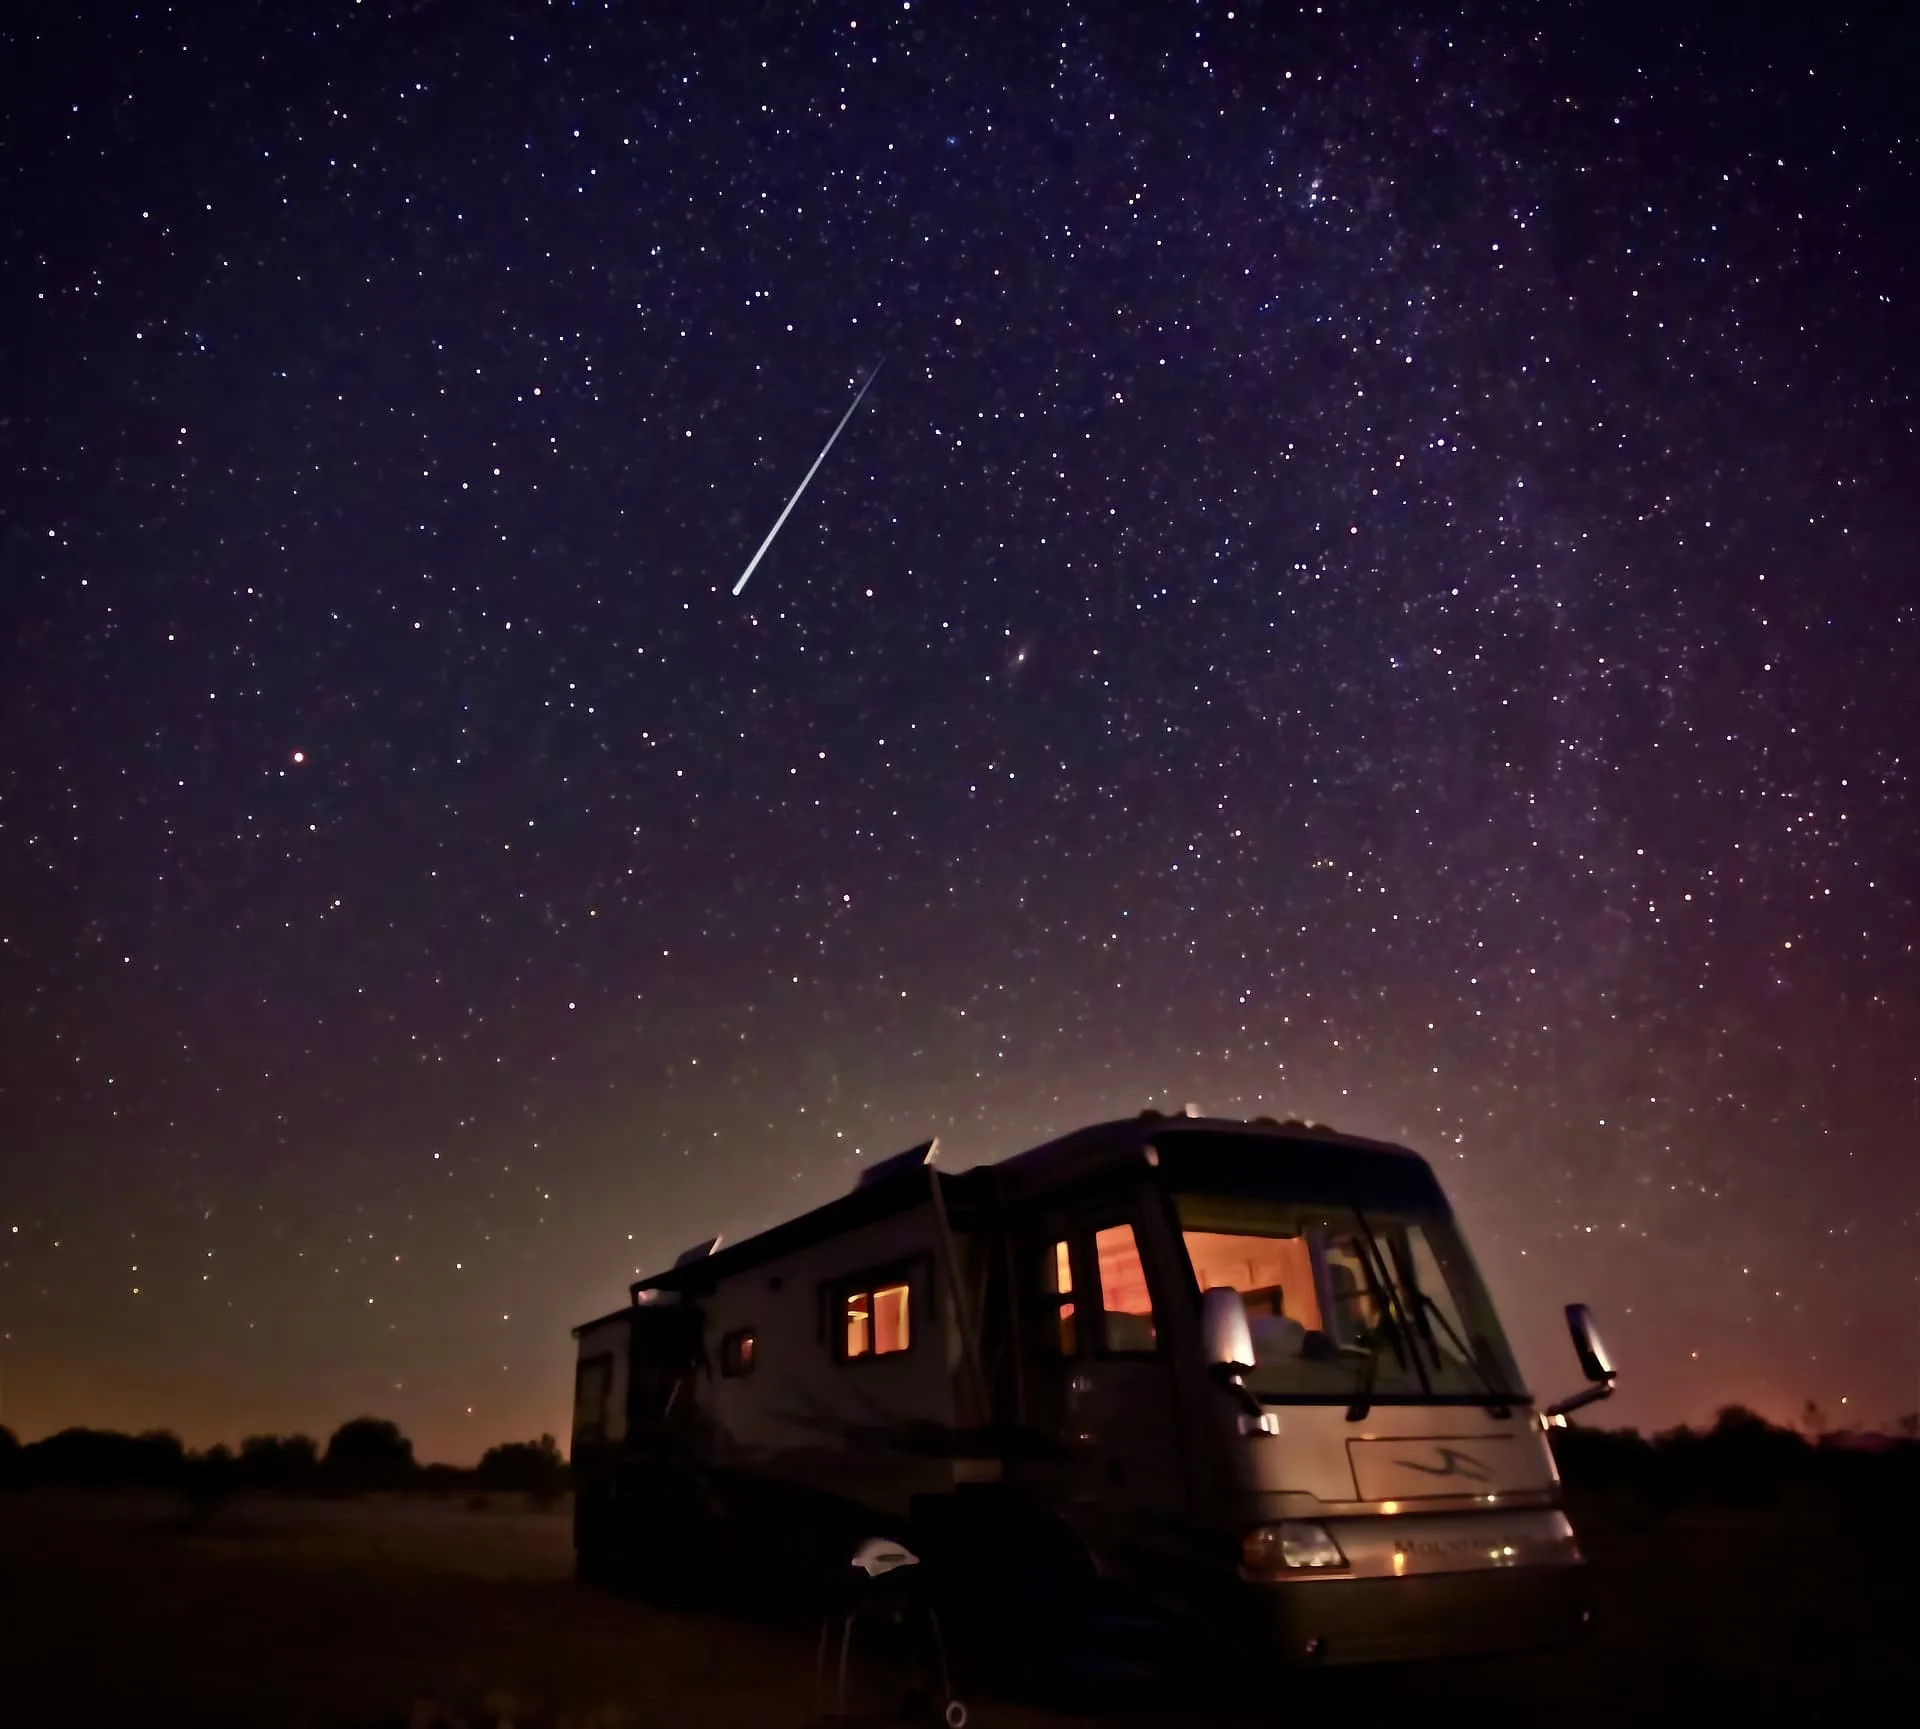 What is dry camping? This photo shows us boondocking with light provided by the starry night sky.